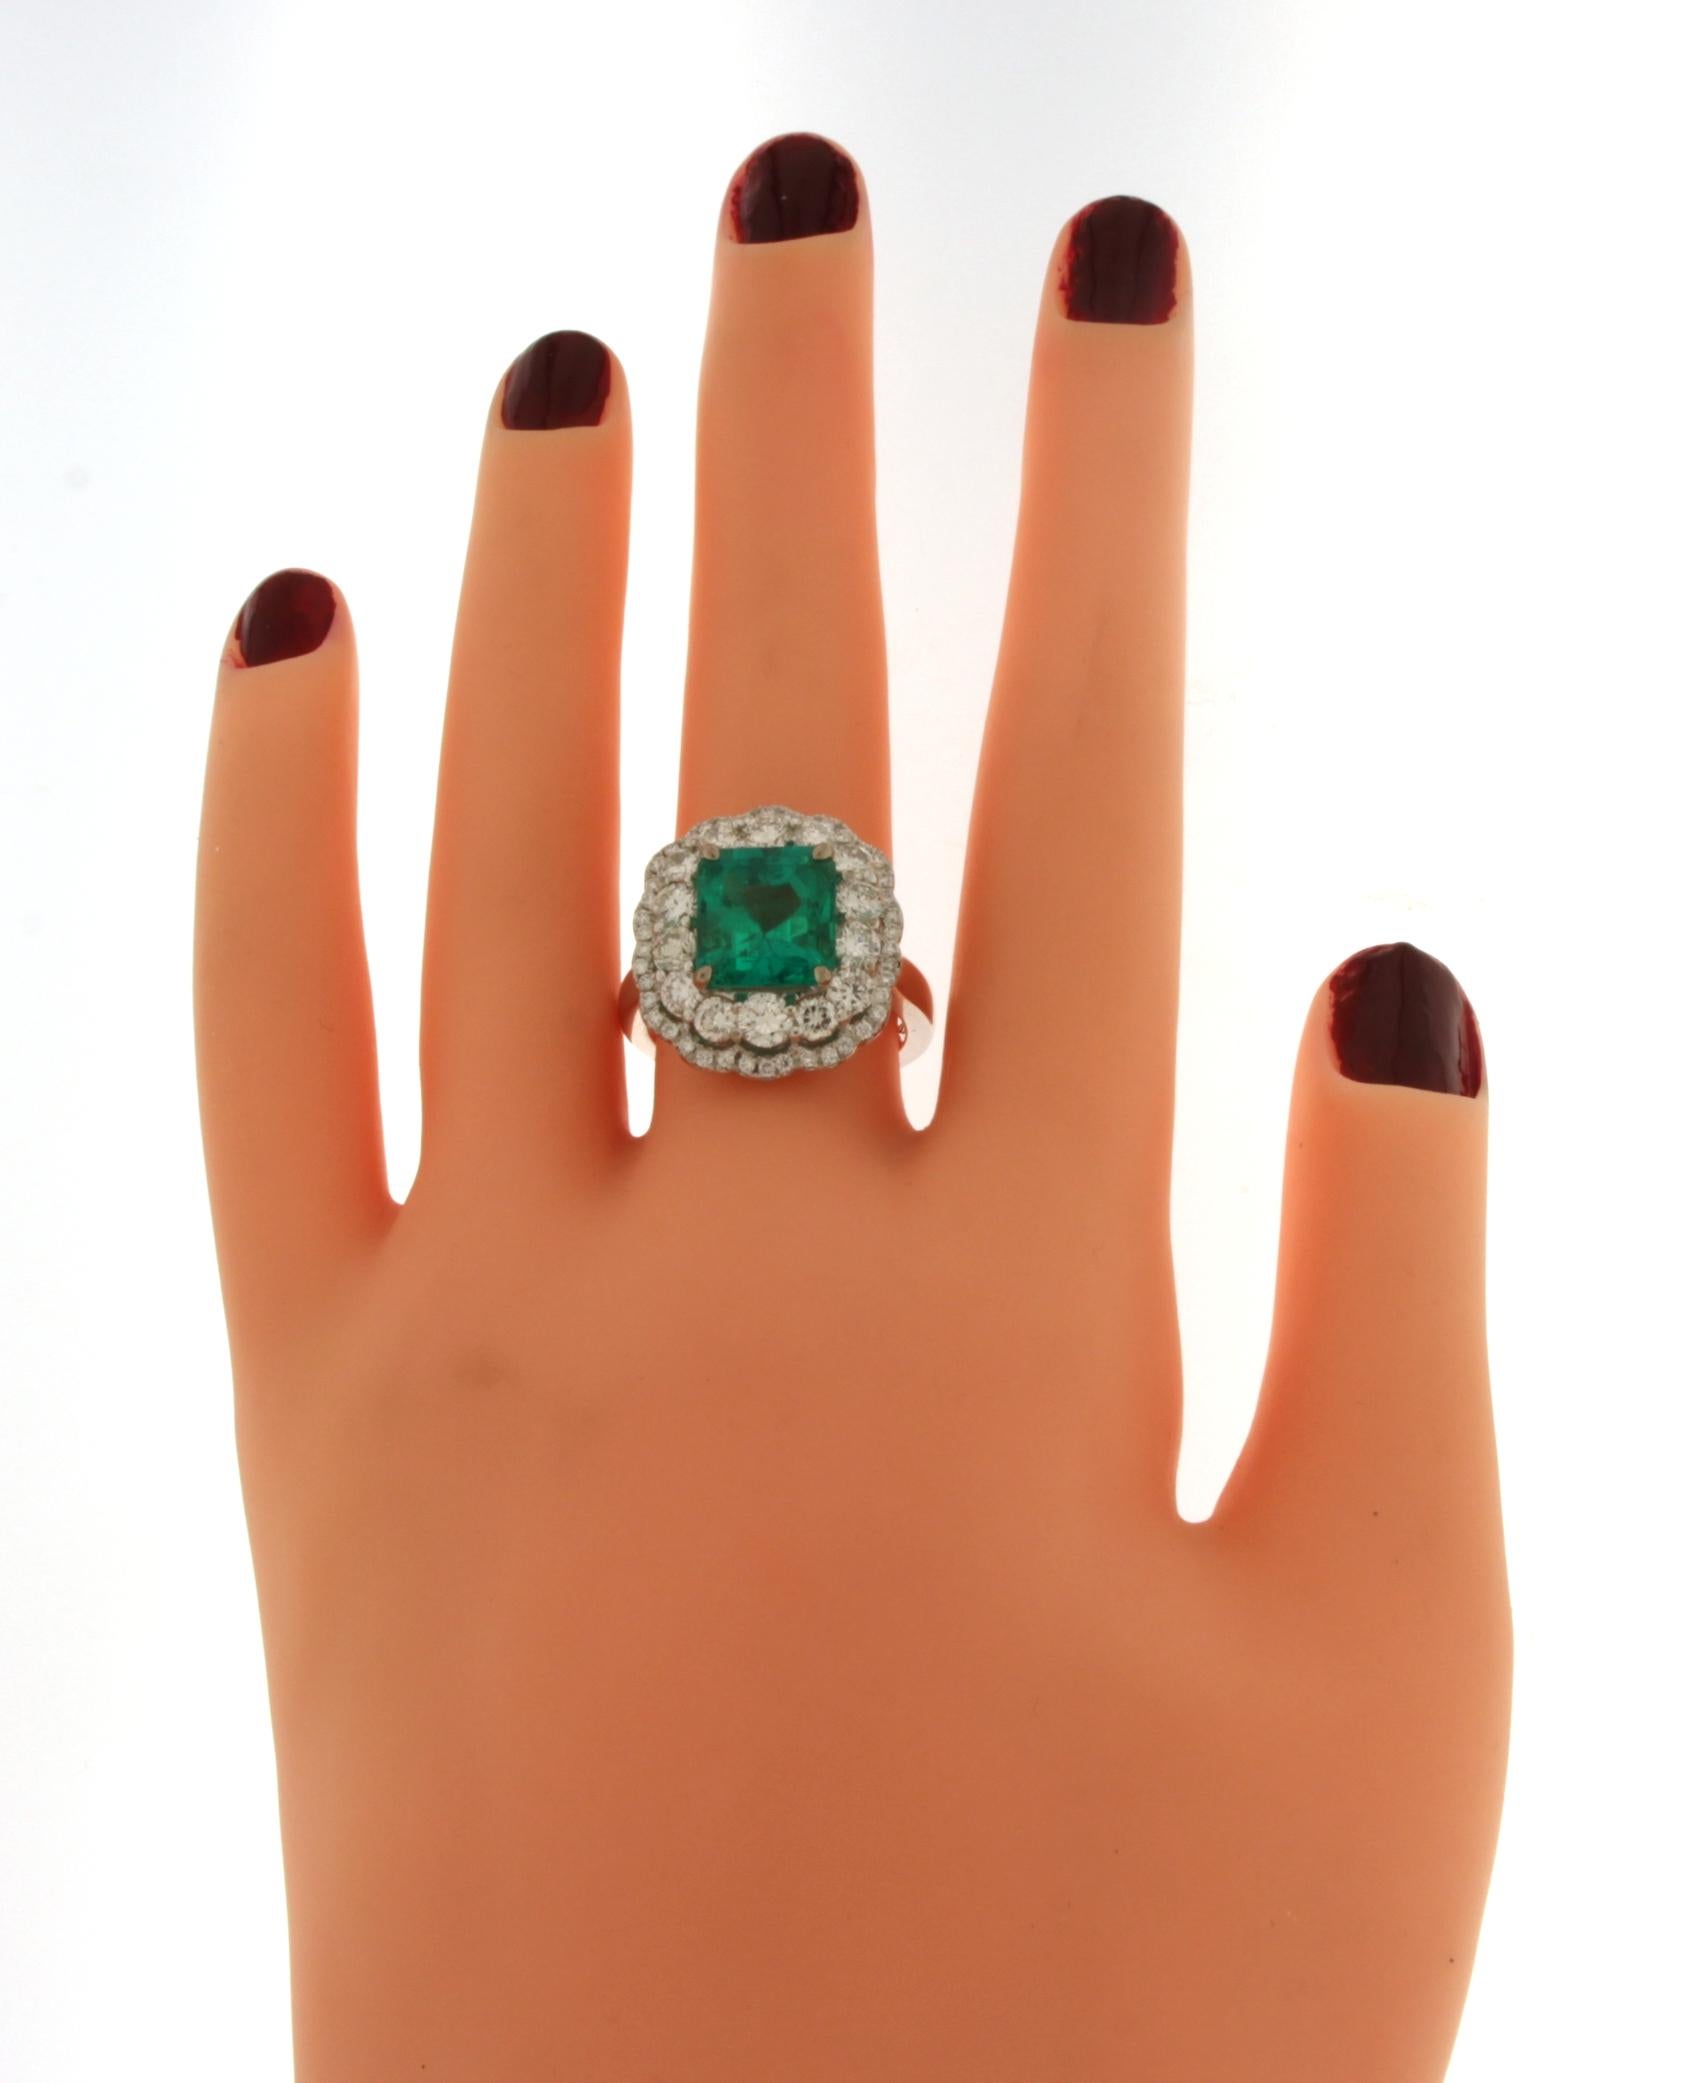 CGL Certified, 4.43 Ct Colombian Emerald Minor Oil, Diamond Ring 18 kt Whit Gol For Sale 5